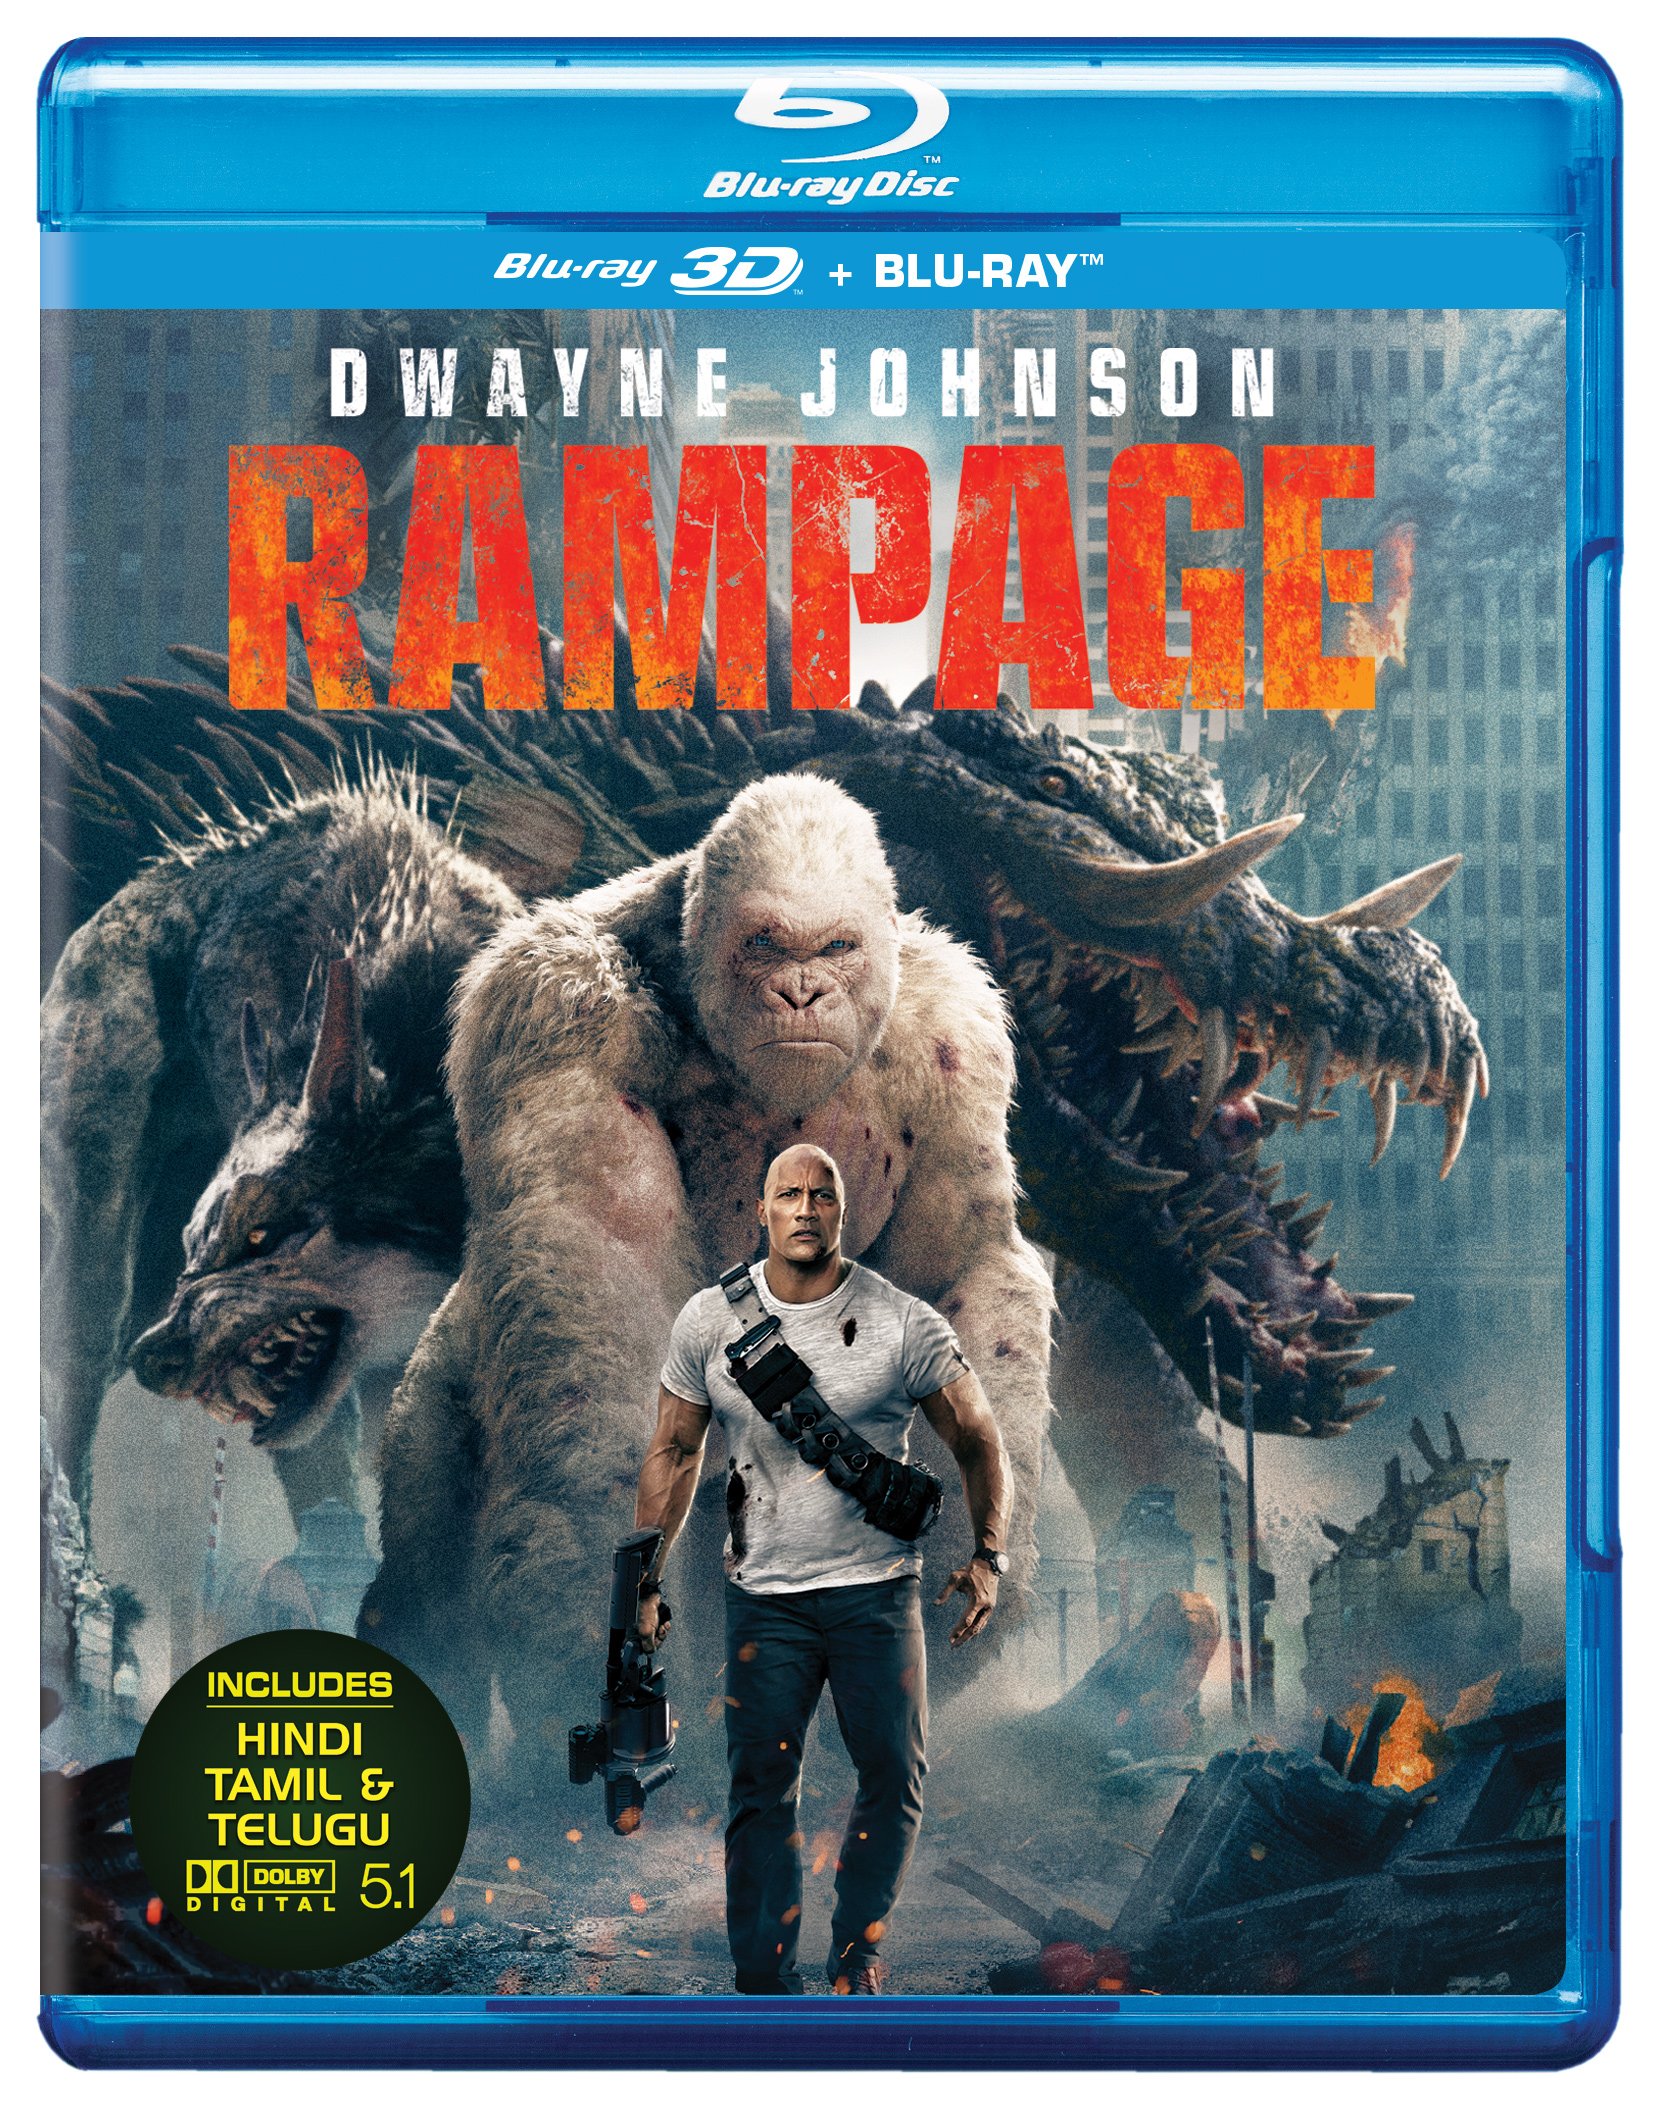 rampage-blu-ray-3d-blu-ray-2-disc-movie-purchase-or-watch-online